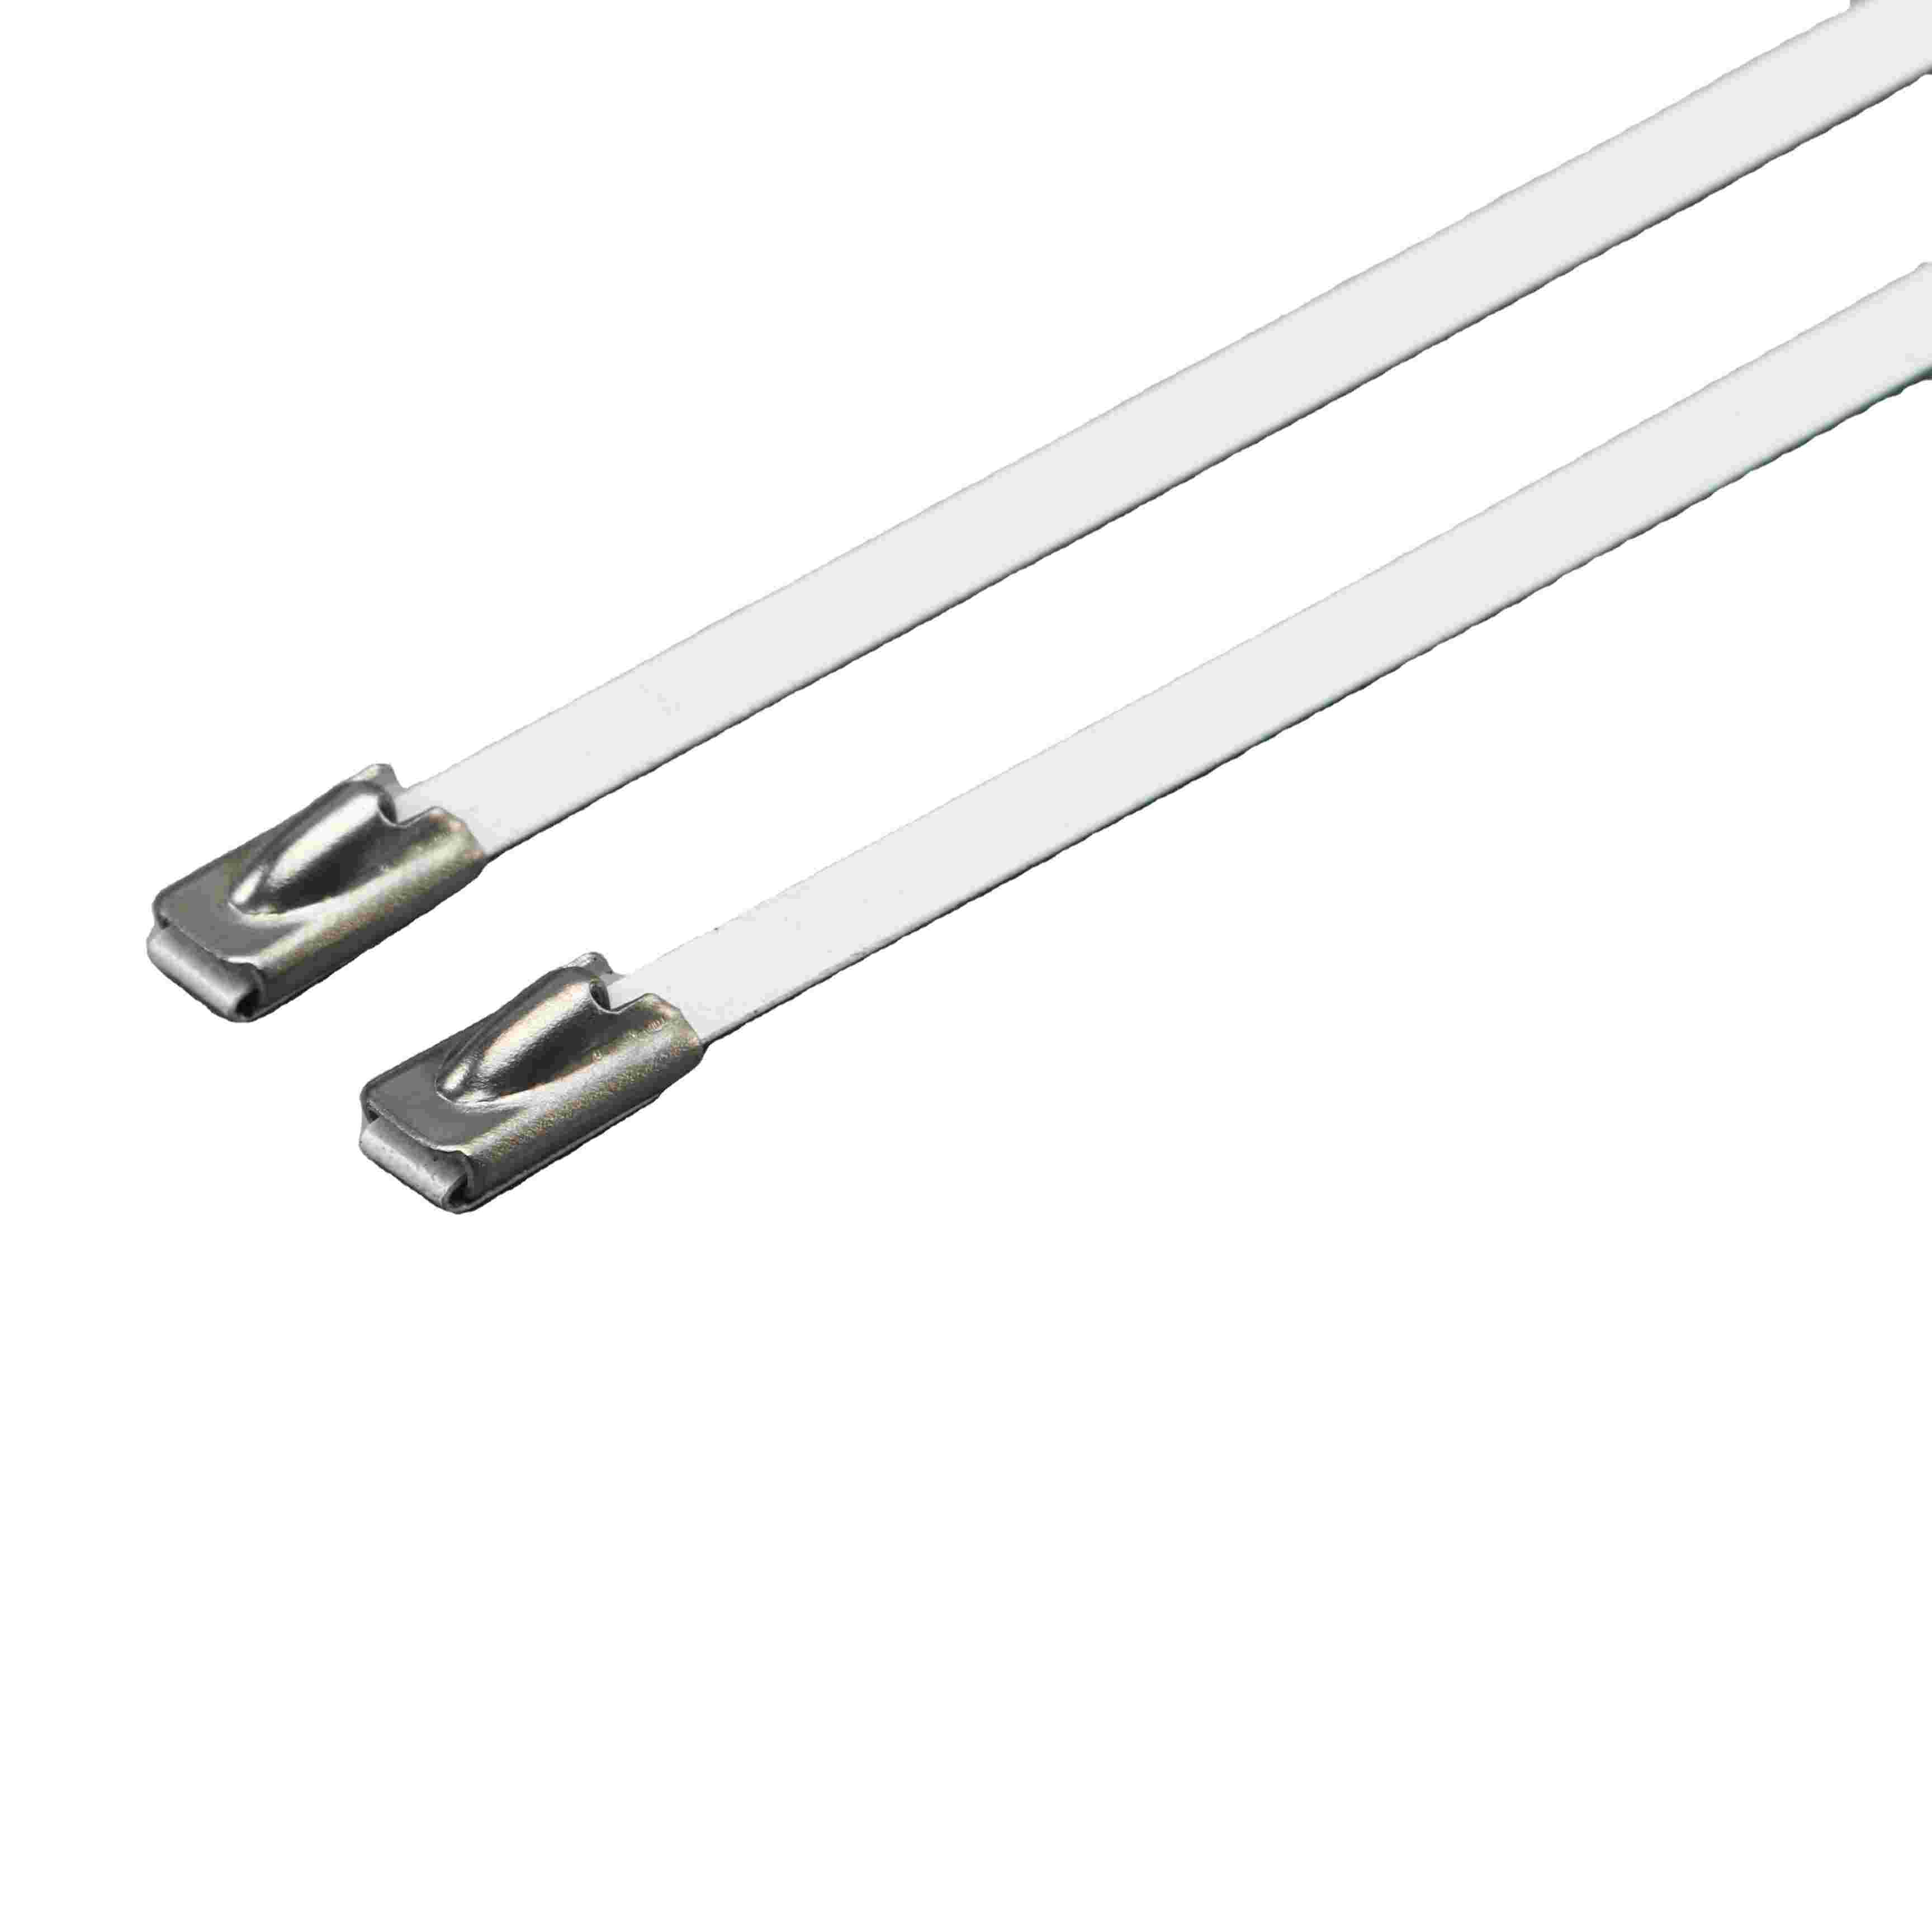 Stainless Steel Buckle Cable Ties - 2